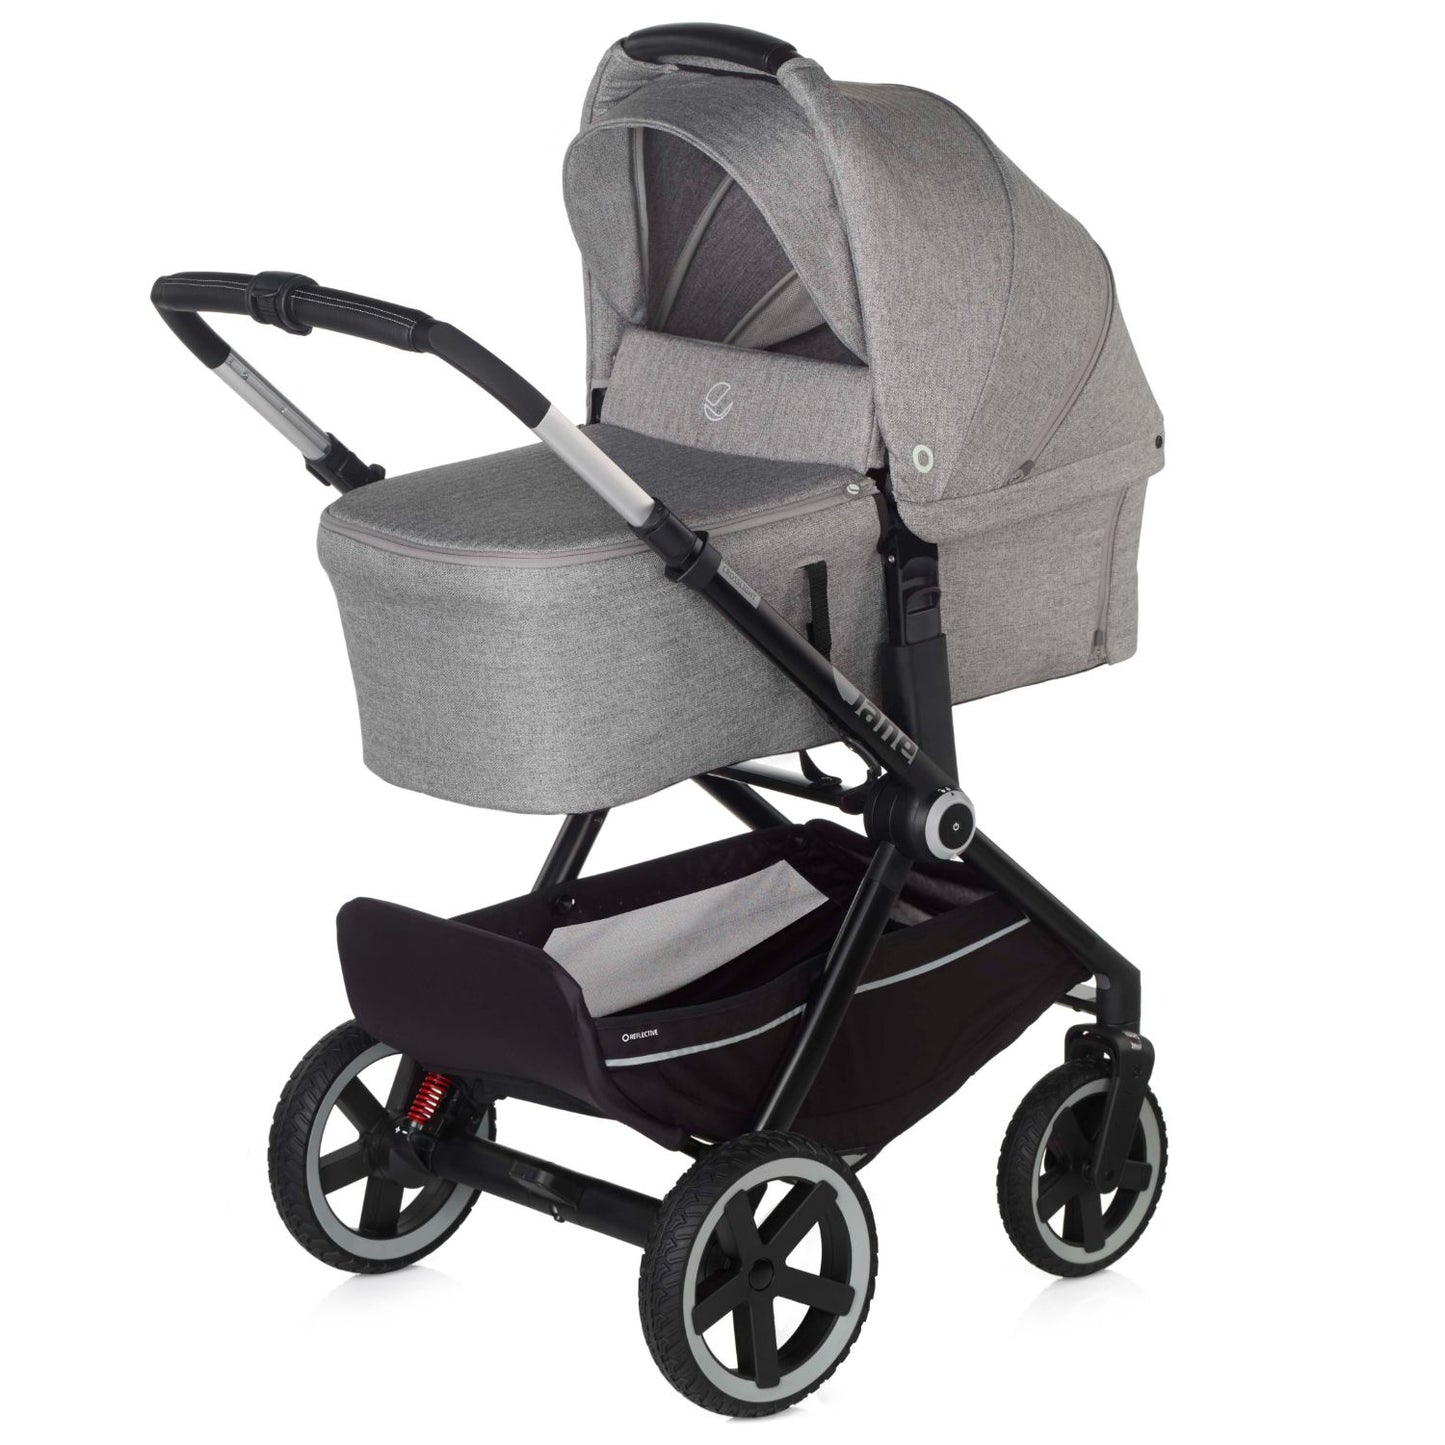 Jané Crosslight-3 + Sweet Carrycot + Koos iSize 3-in-1 Travel System